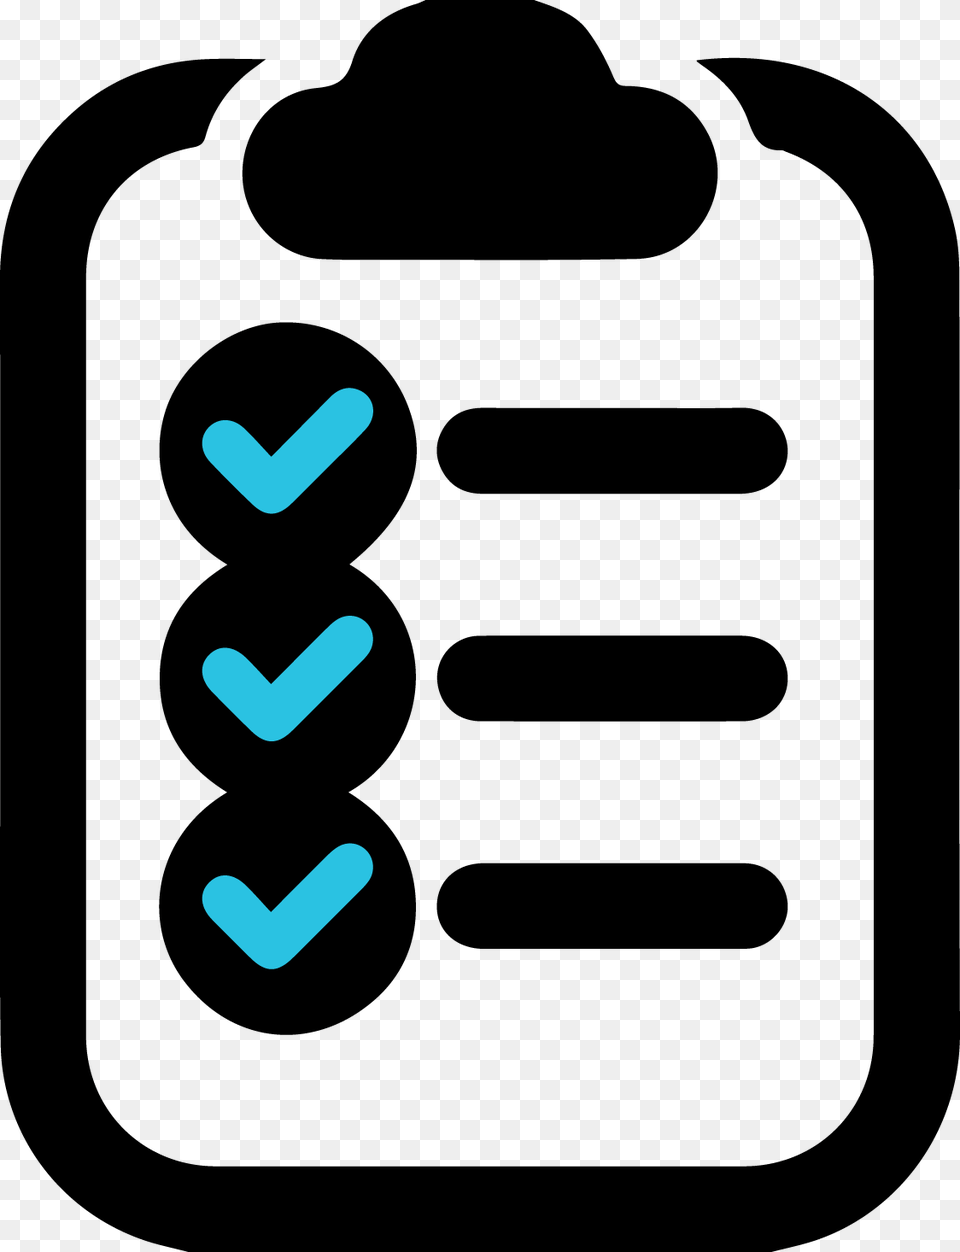 Qaulification Check Icon Png Image